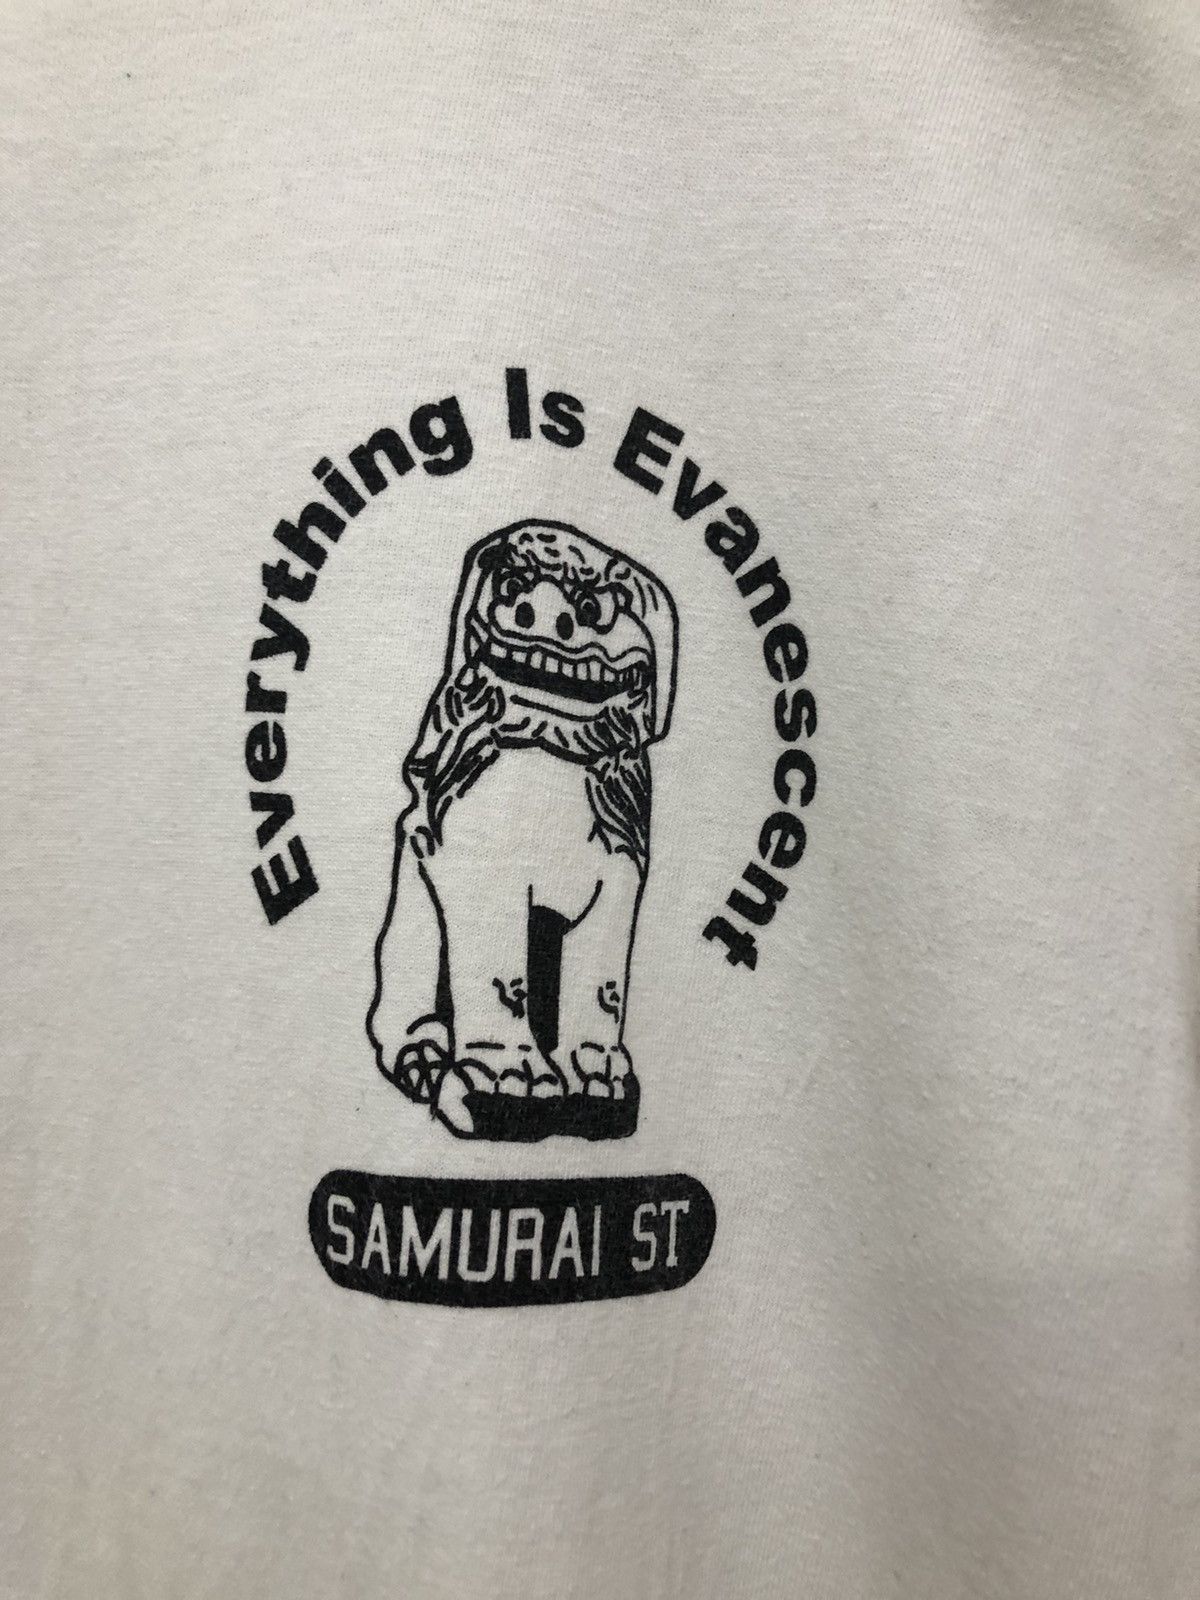 Vintage 90s Samurai Jeans ‘Everything Is Evanescent Shirt - 5